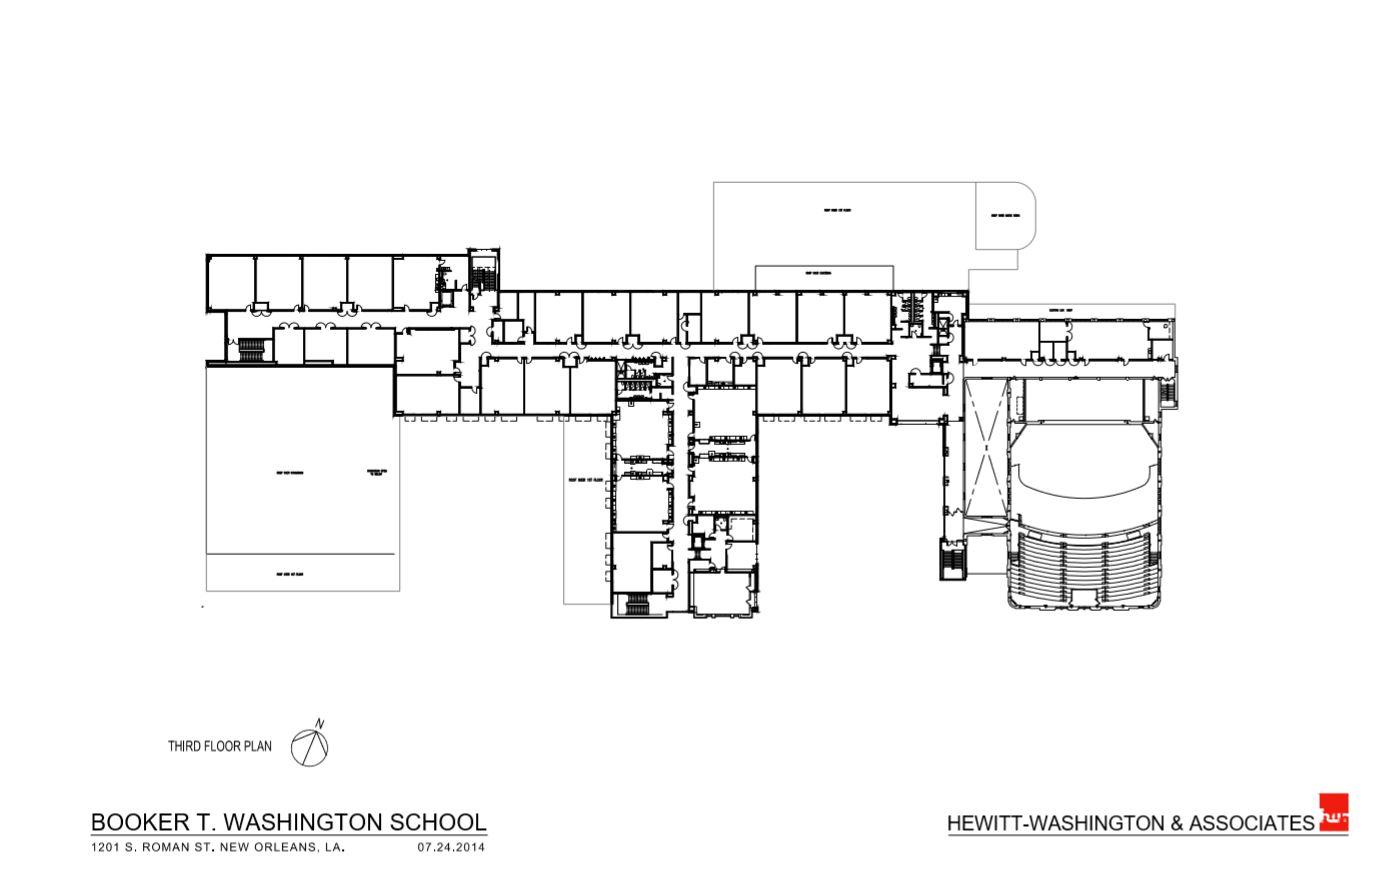 A black-and-white architectural plan shows the new design for the third floor of Booker T. Washington High School, with three centrally anchored hallways, double-loaded with classrooms on either side